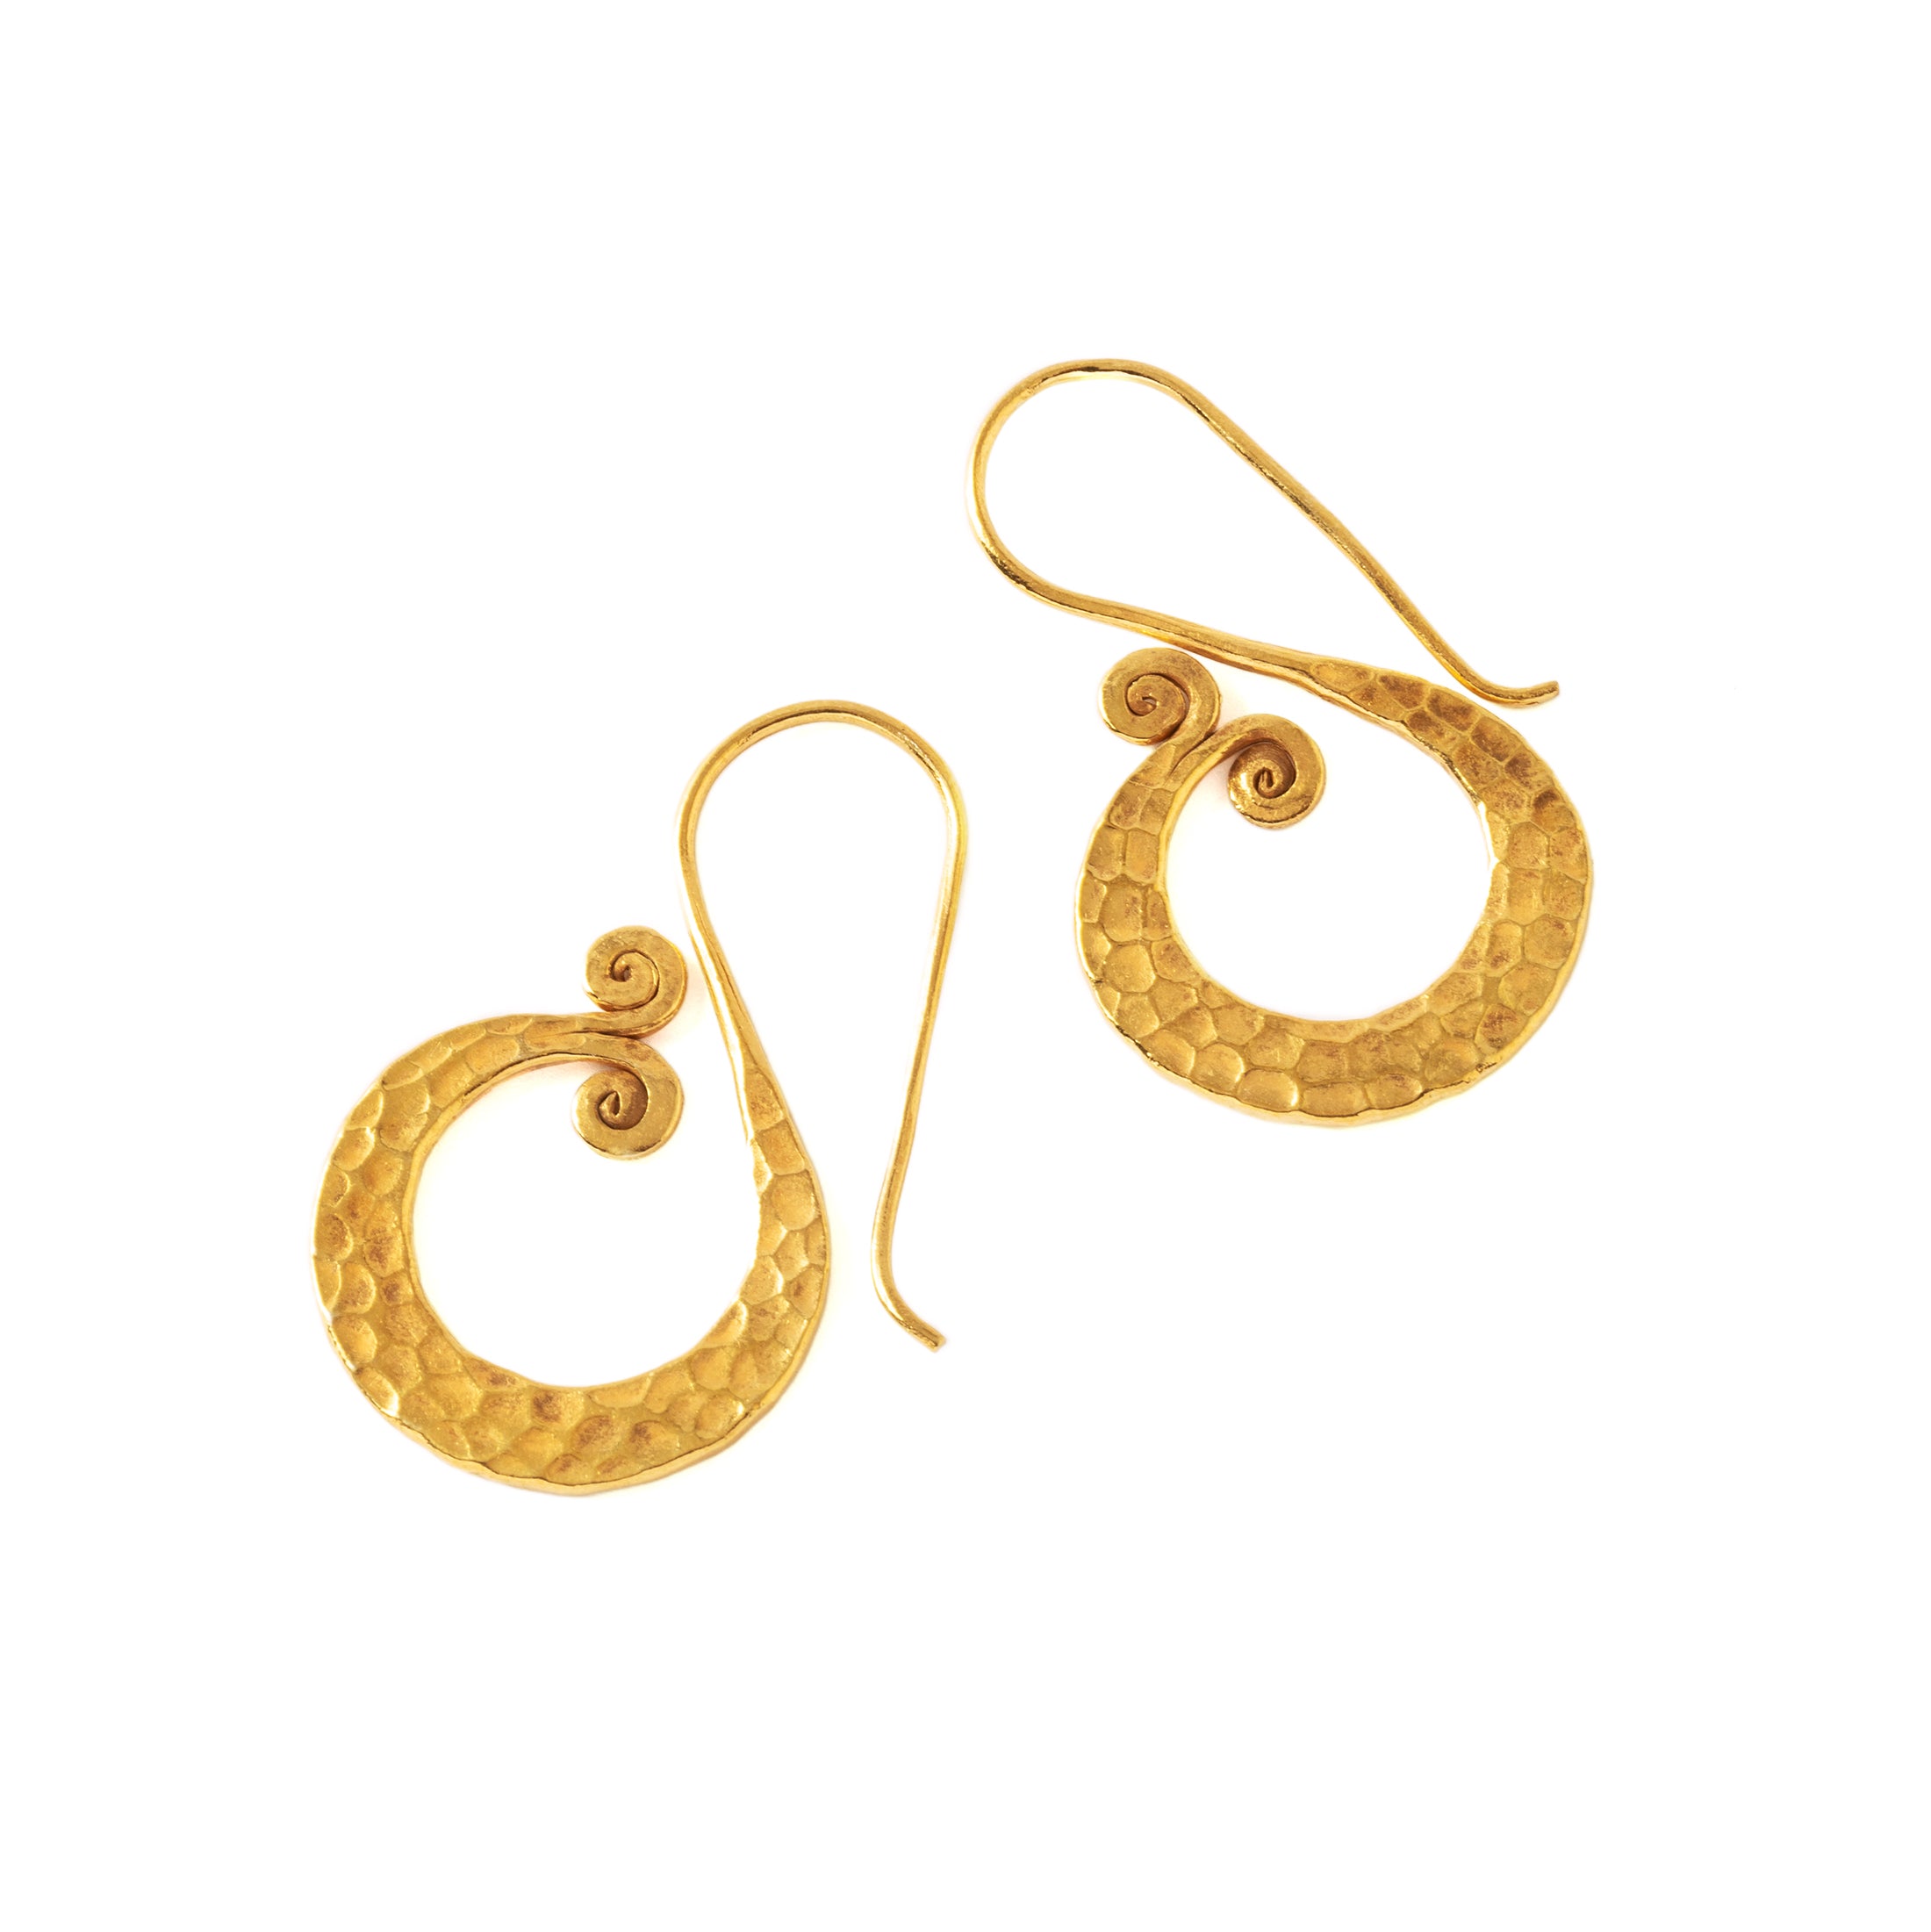 Hammered Gold Fishtail Tribal Earrings frontal view